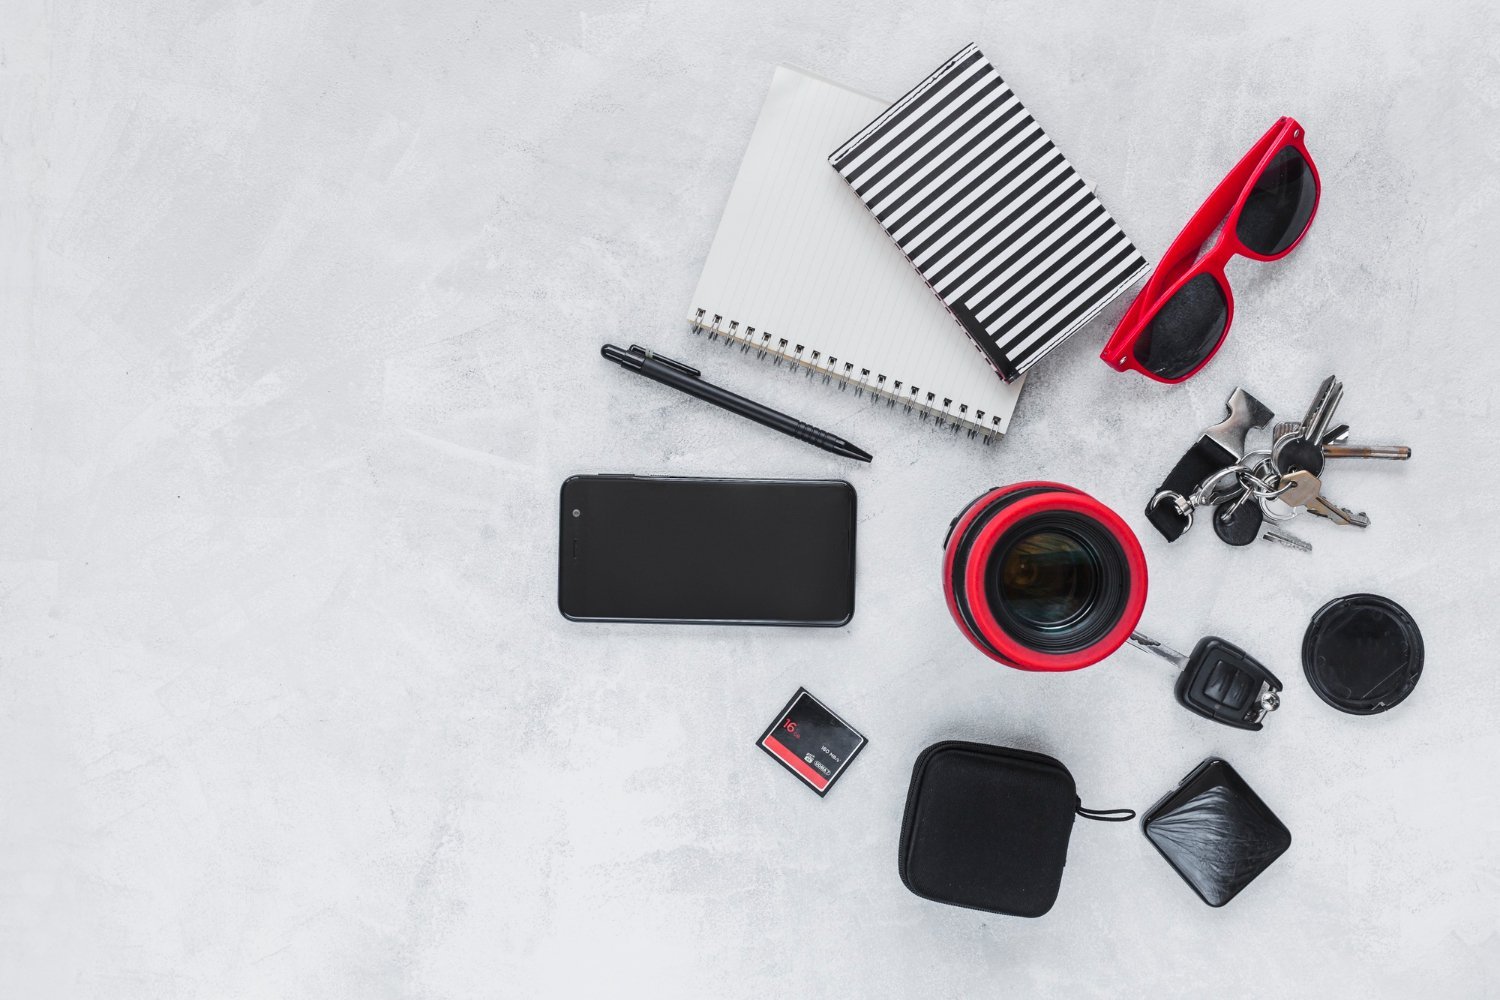 Smartphone Accessories for Productivity